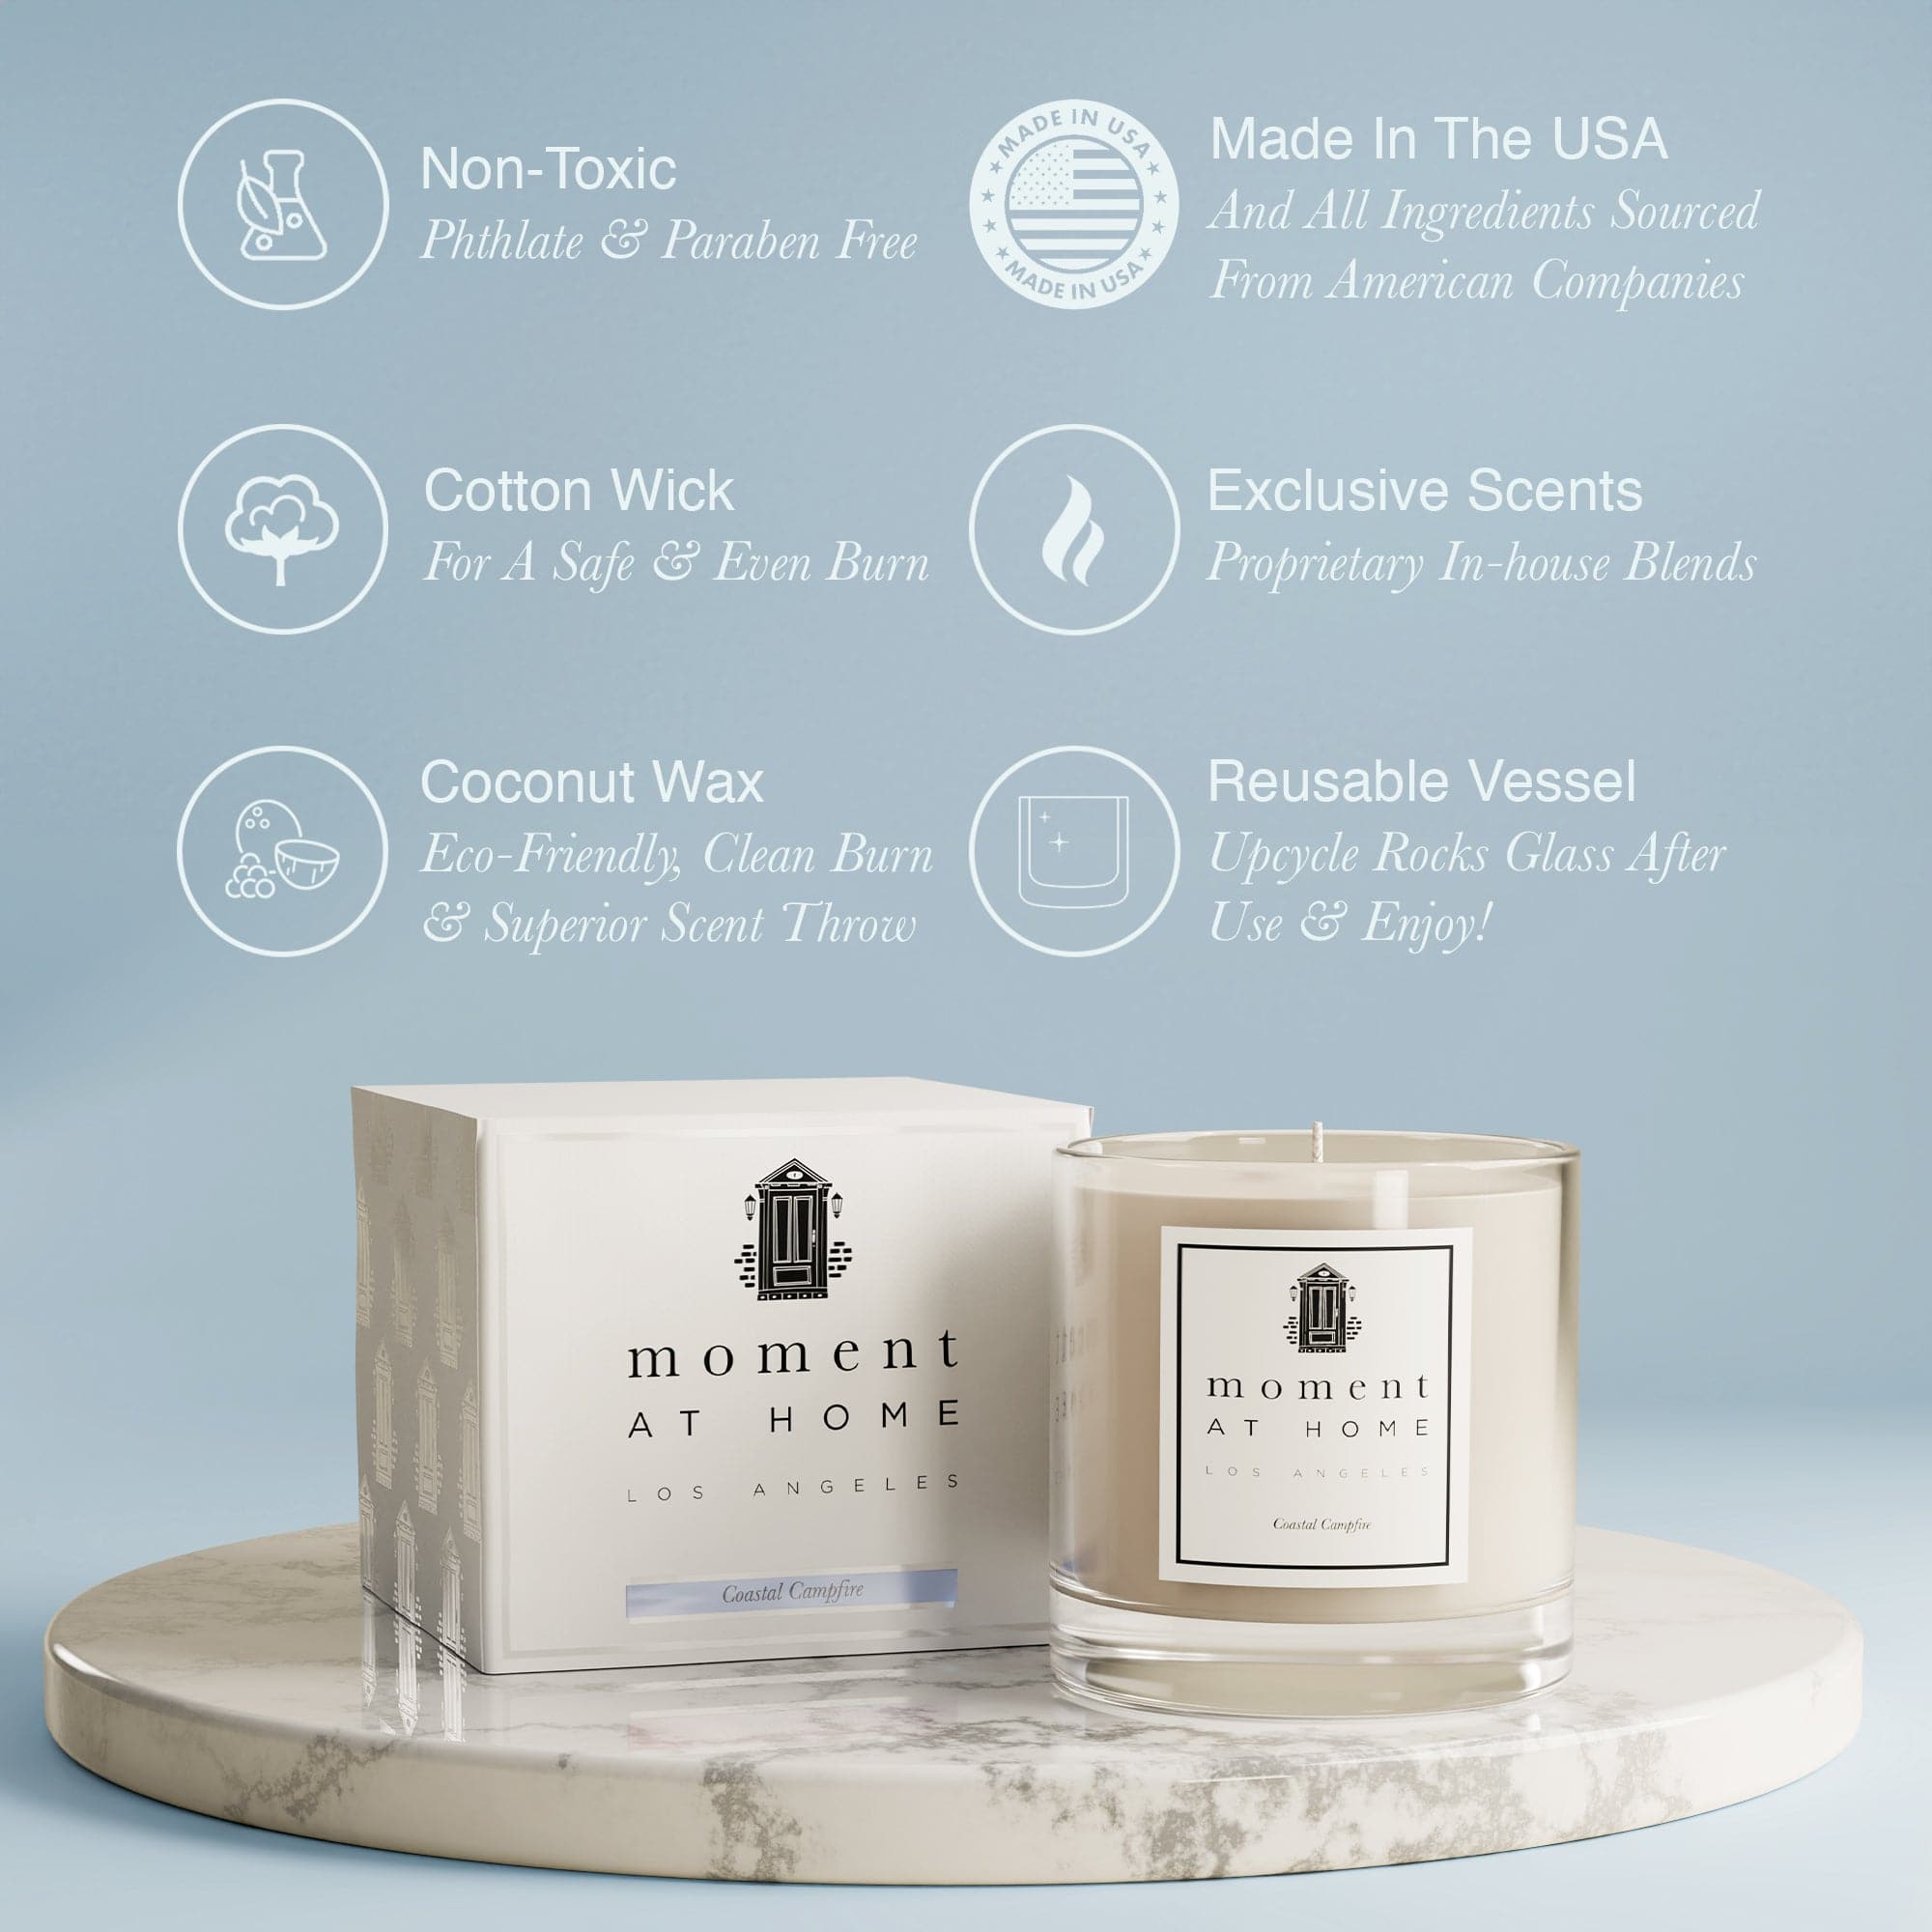 Moment At Home Candles are Made In The USA with Coconut Wax, are non-toxic and safe to burn at home. 